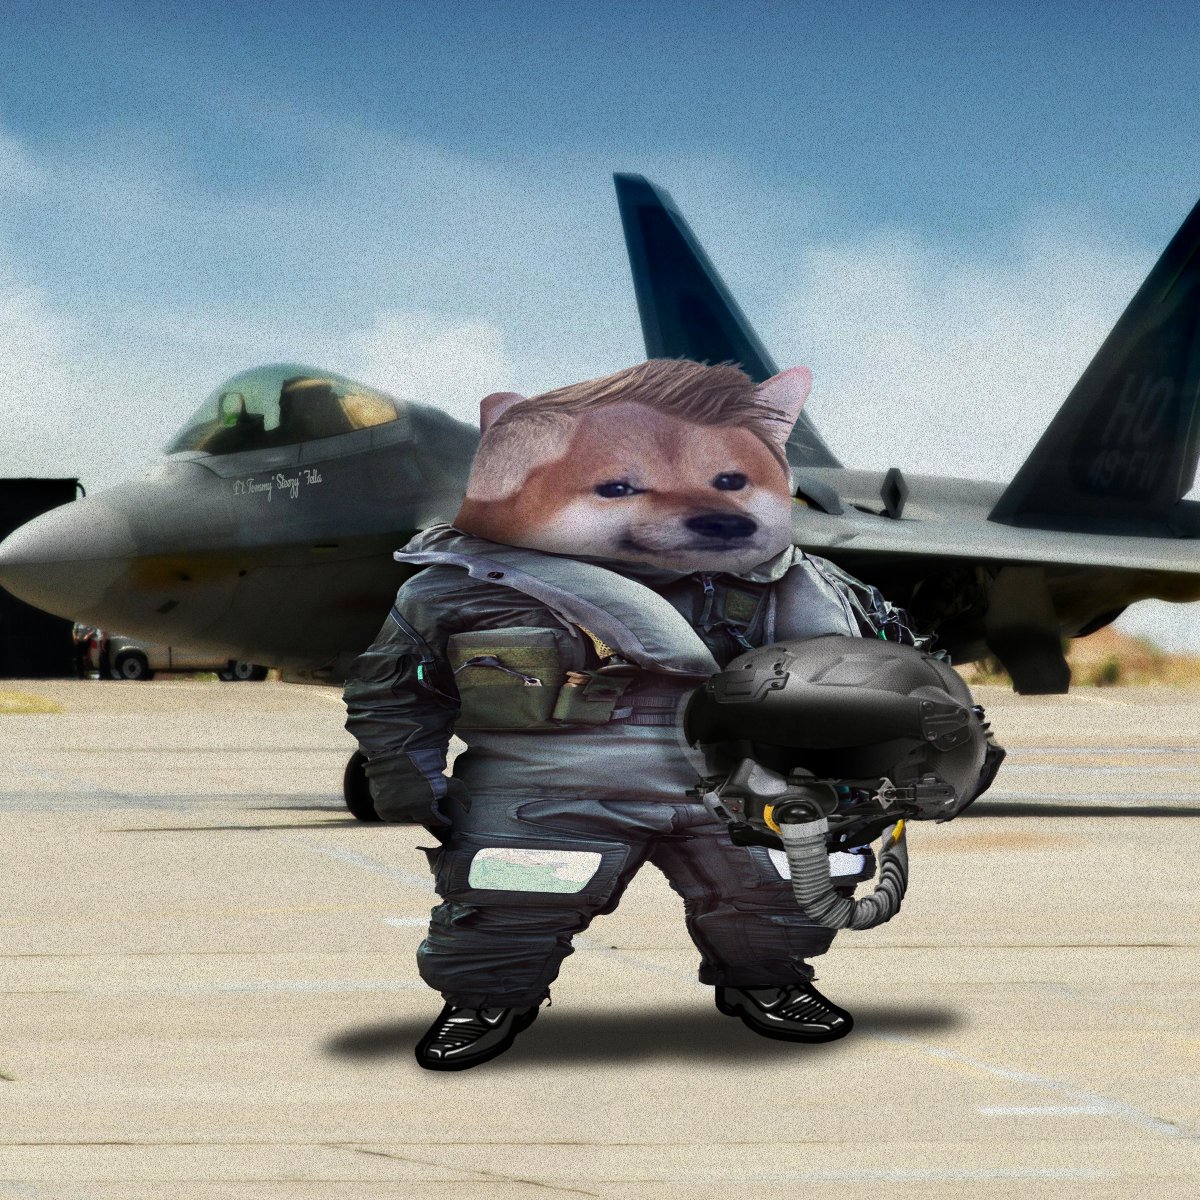 #FellaDelivery for @SteezyyTommyy One F-22 Raptor Fella is ready to take to the sky for high-altitude bonks! Welcome to #NAFO #NAFOfellas #NAFOExpansionIsNonNegotiable @Kama_Kamilia @goblin__soup @Official_NAFO